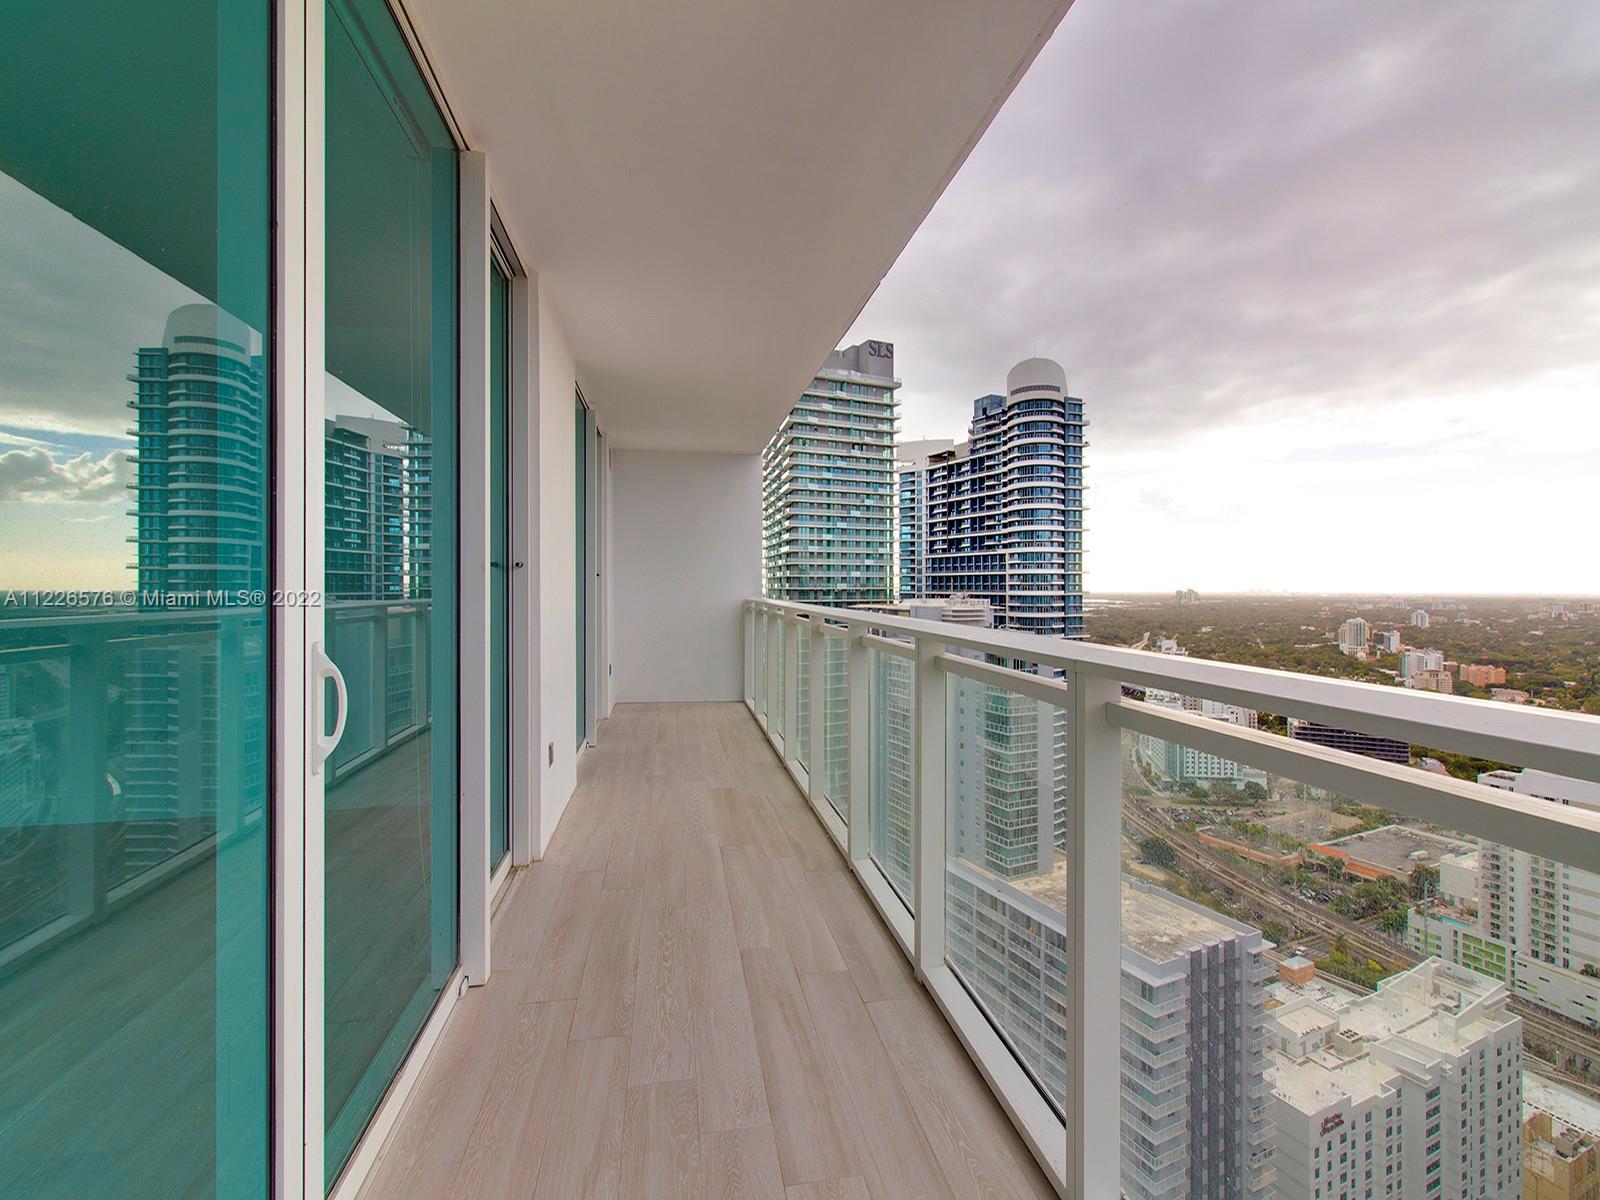 This corner unit offers amazing views from one of Brickell's most iconic buildings. The Bond is situ